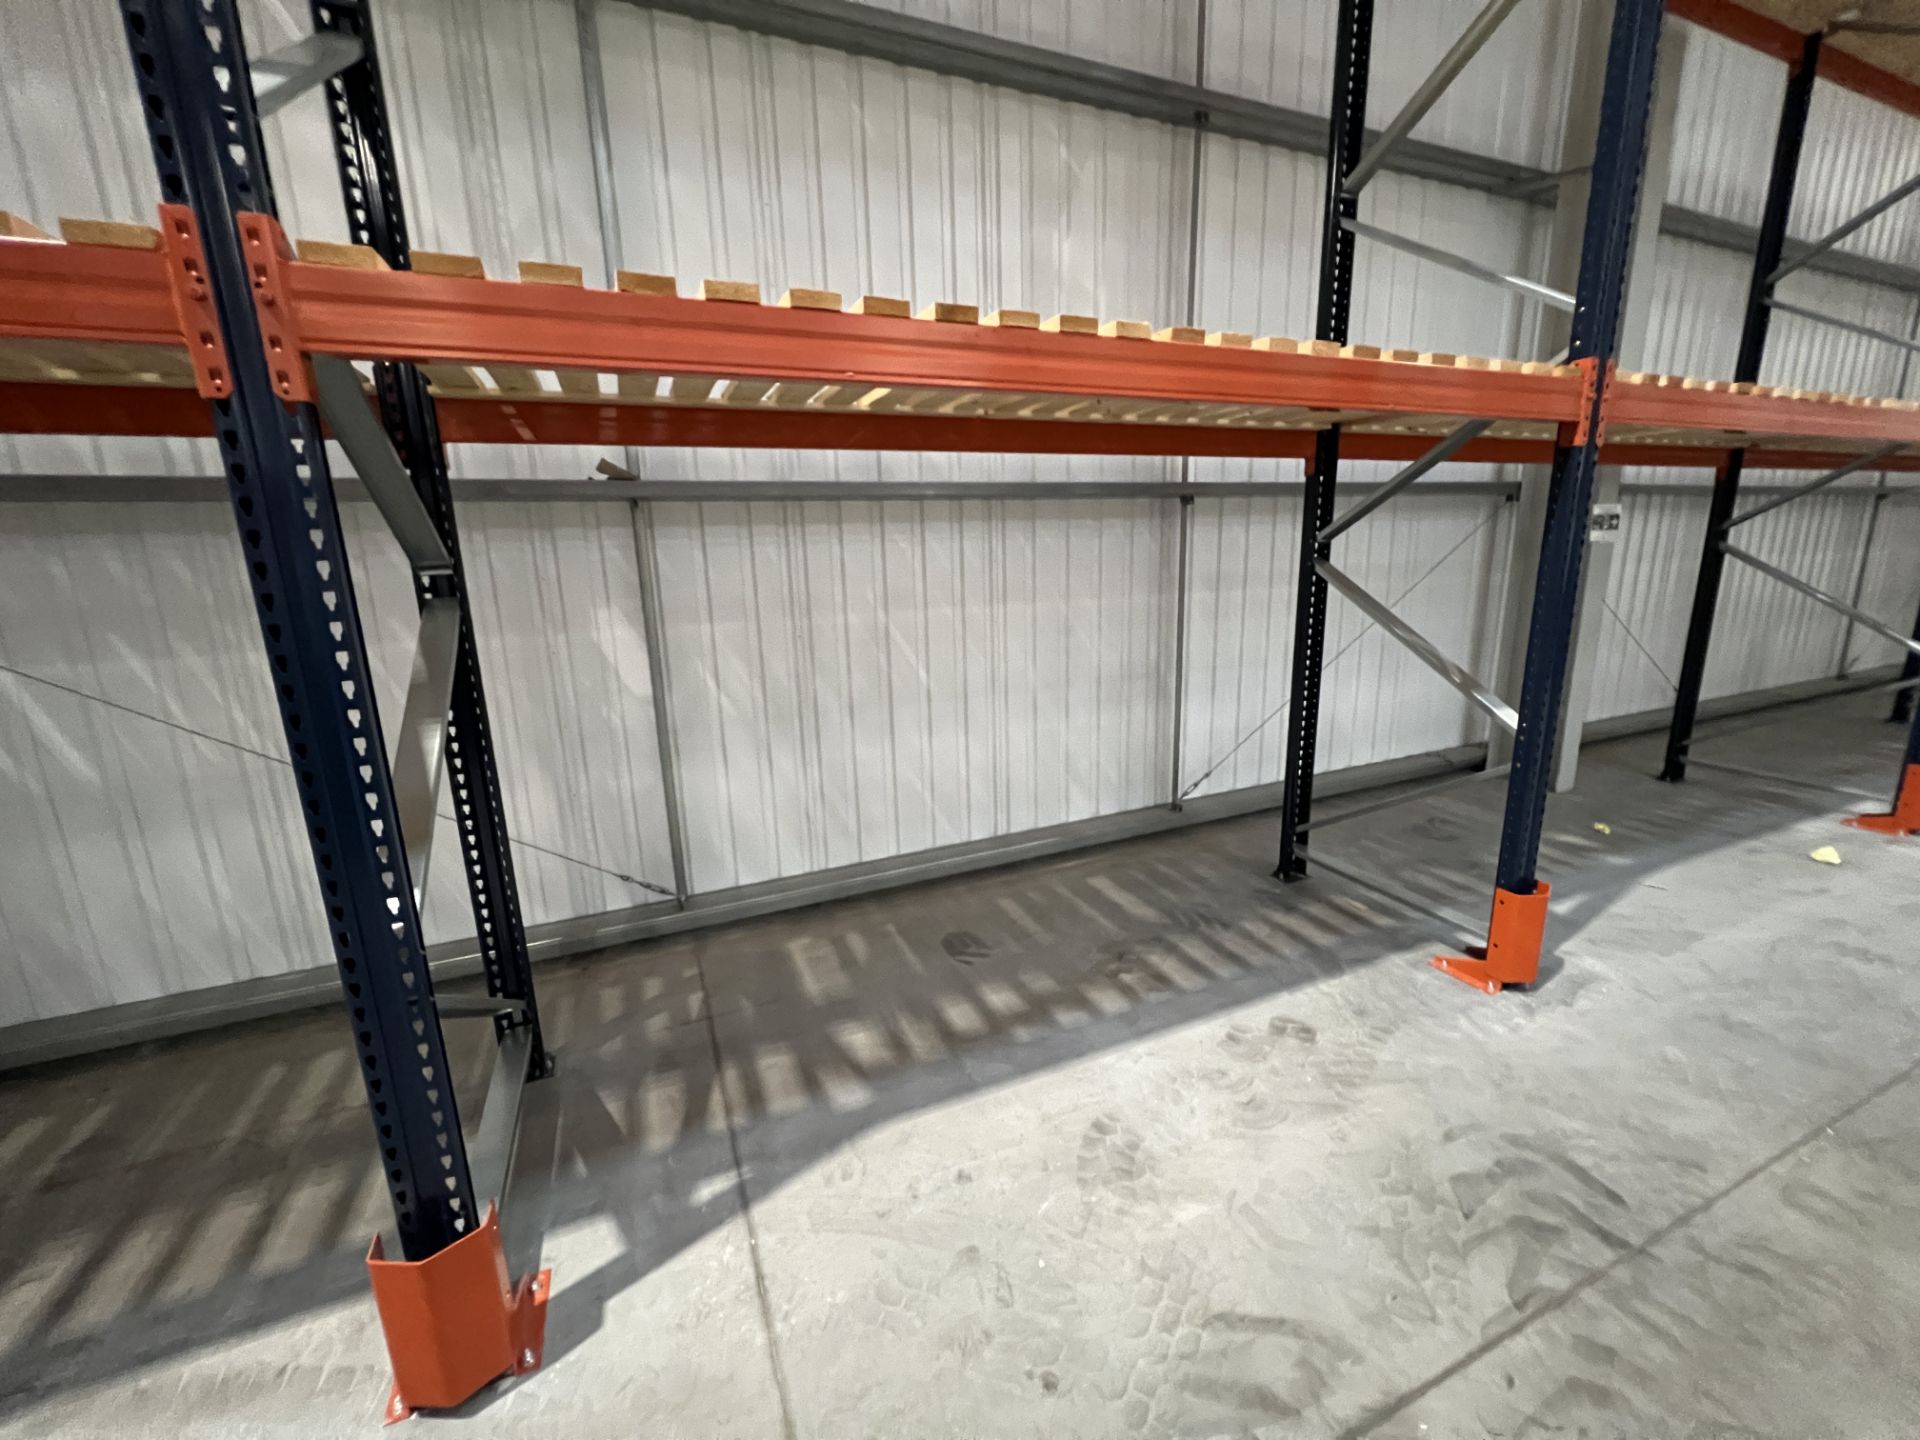 Mecalux M-22P high bay boltless pallet racking (2021), a 53 metre single run with 16 bays, to - Image 10 of 17